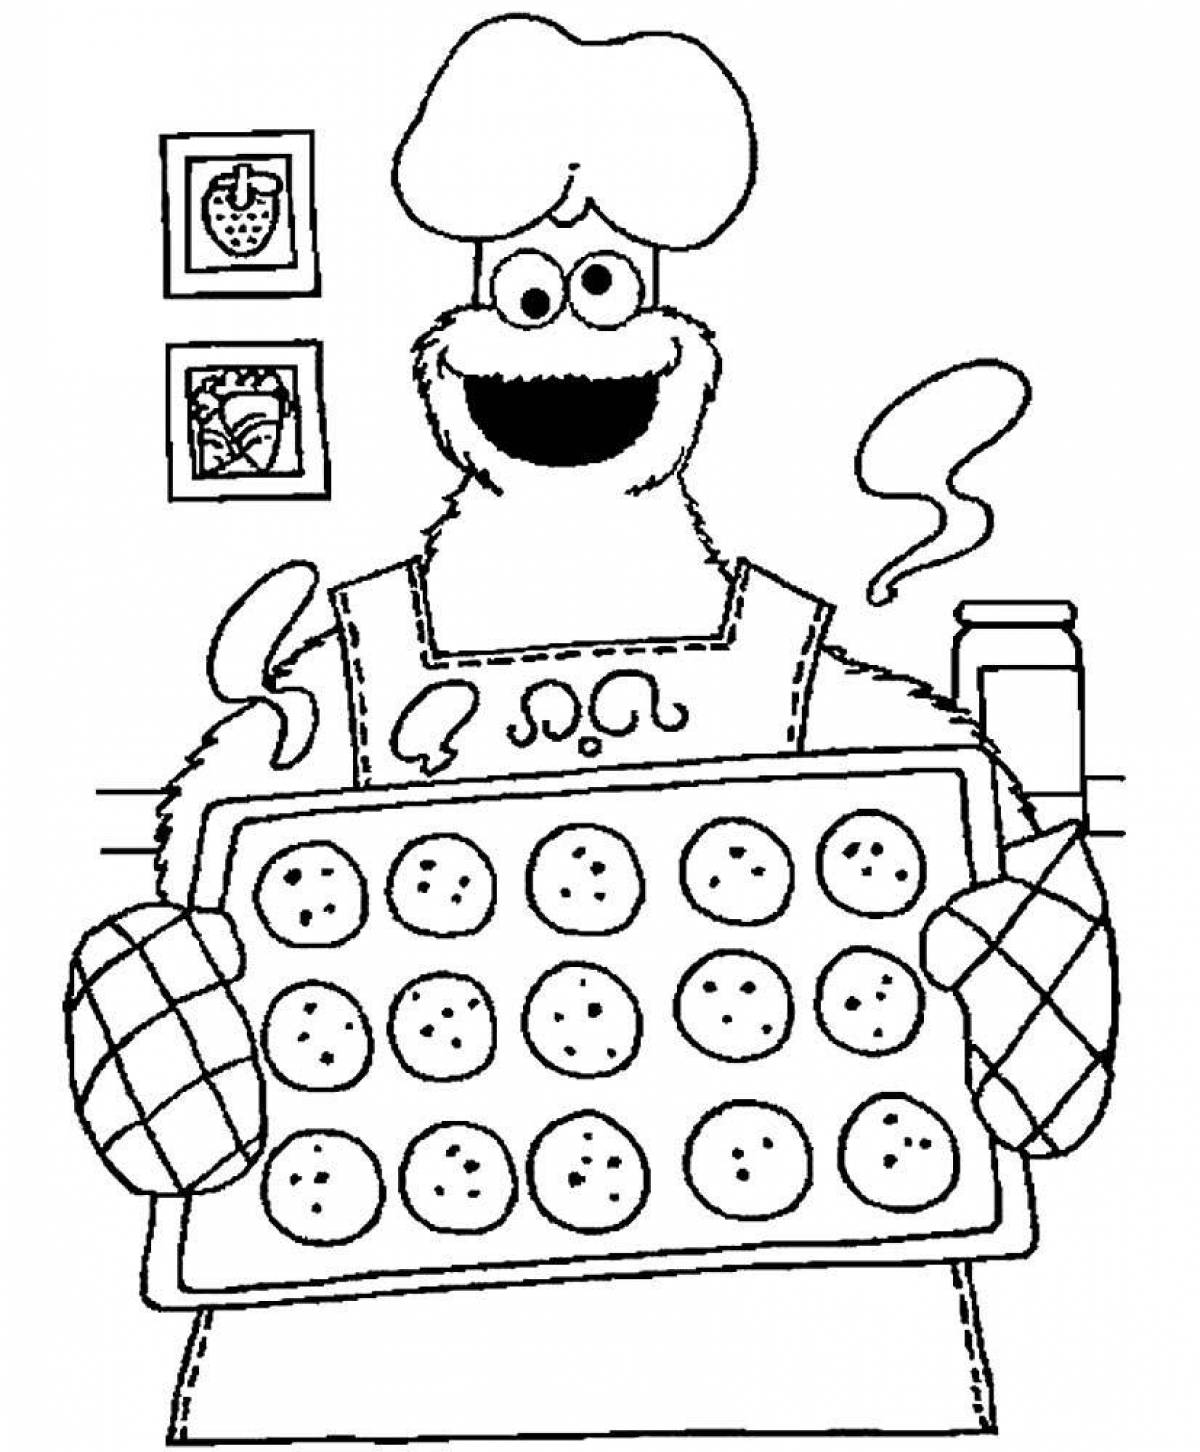 Adorable cookie coloring page